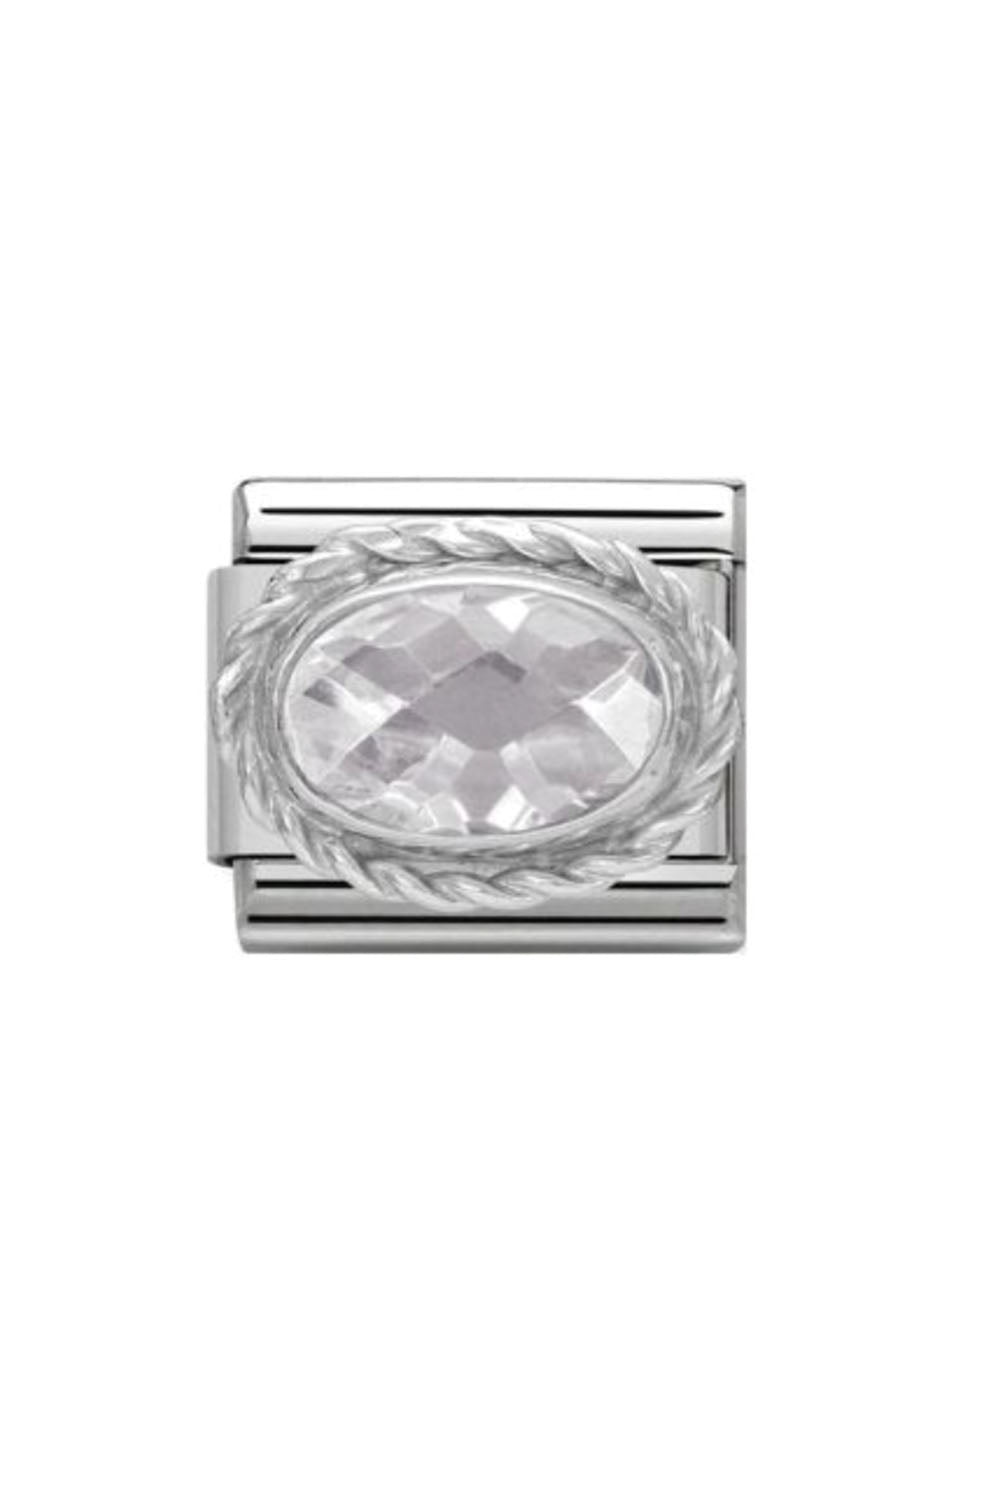 CZ faceted with 925 sterling silver setting and CZ White